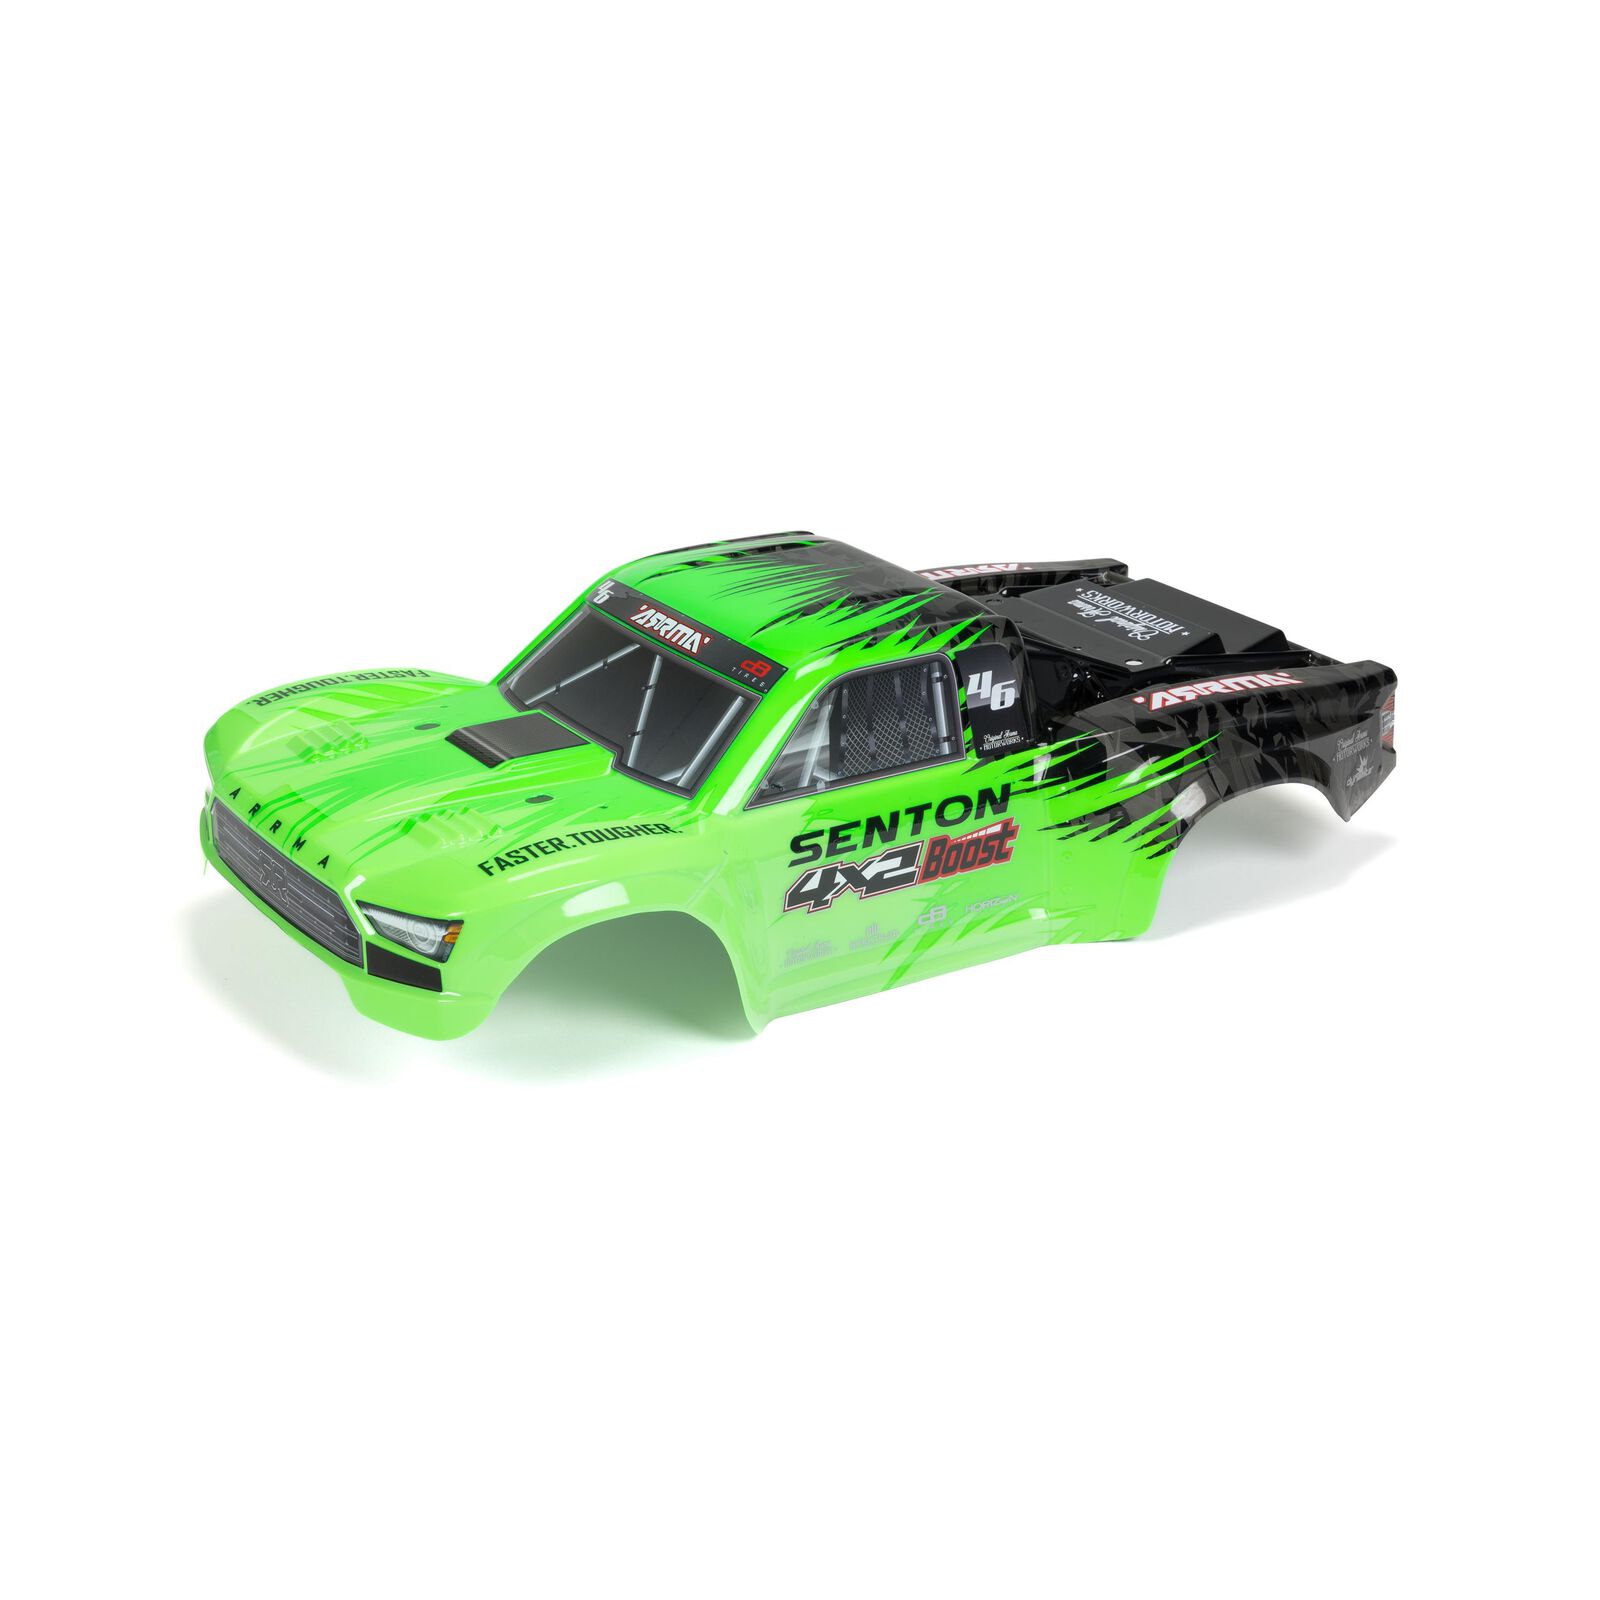 1/10 SENTON 4X2 Painted Decaled Trimmed Body Green/Black